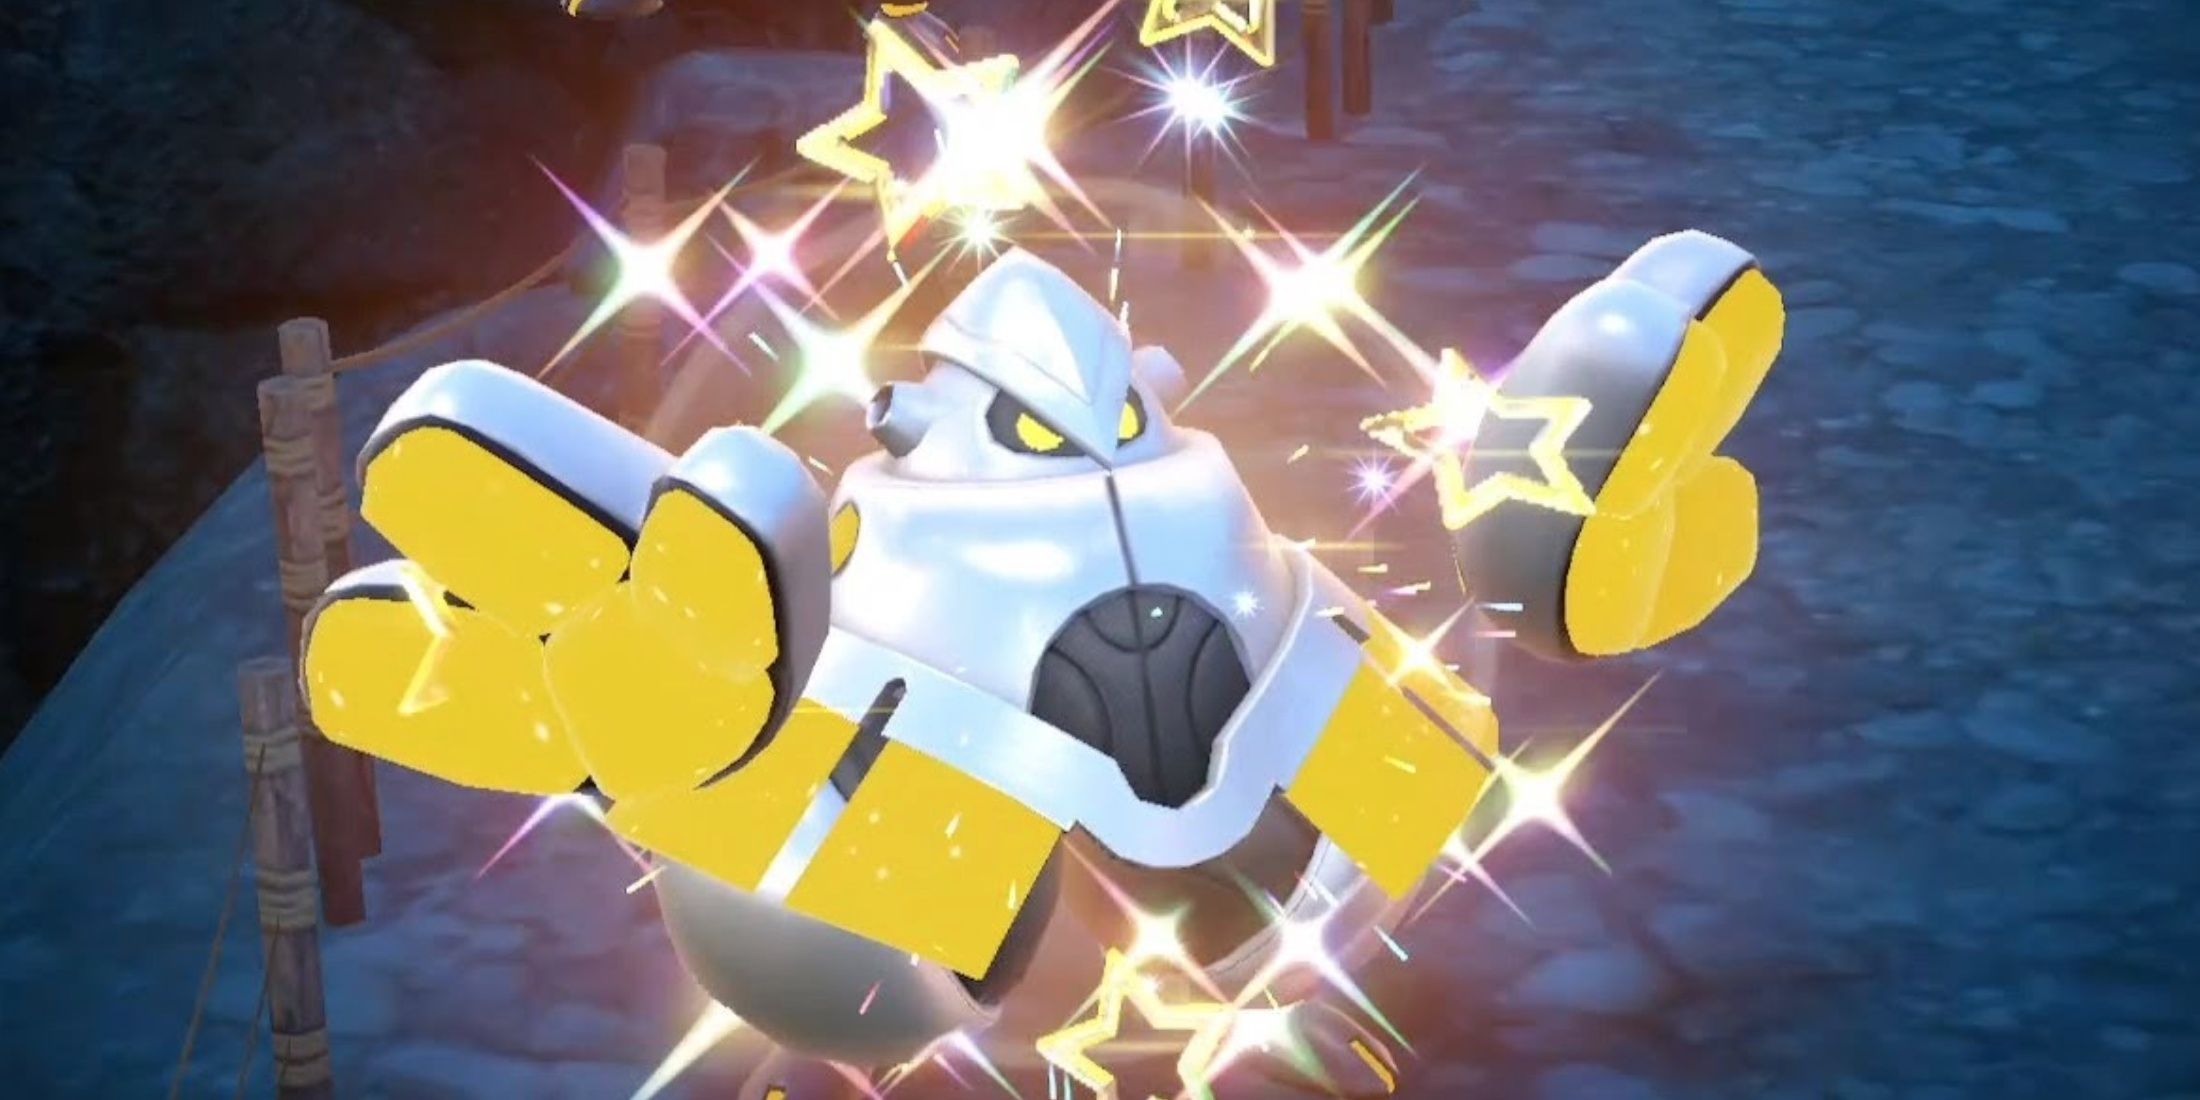 Iron Hands puts its hands up as shiny stars sparkle around it in Pokemon Scarlet & Violet S&V